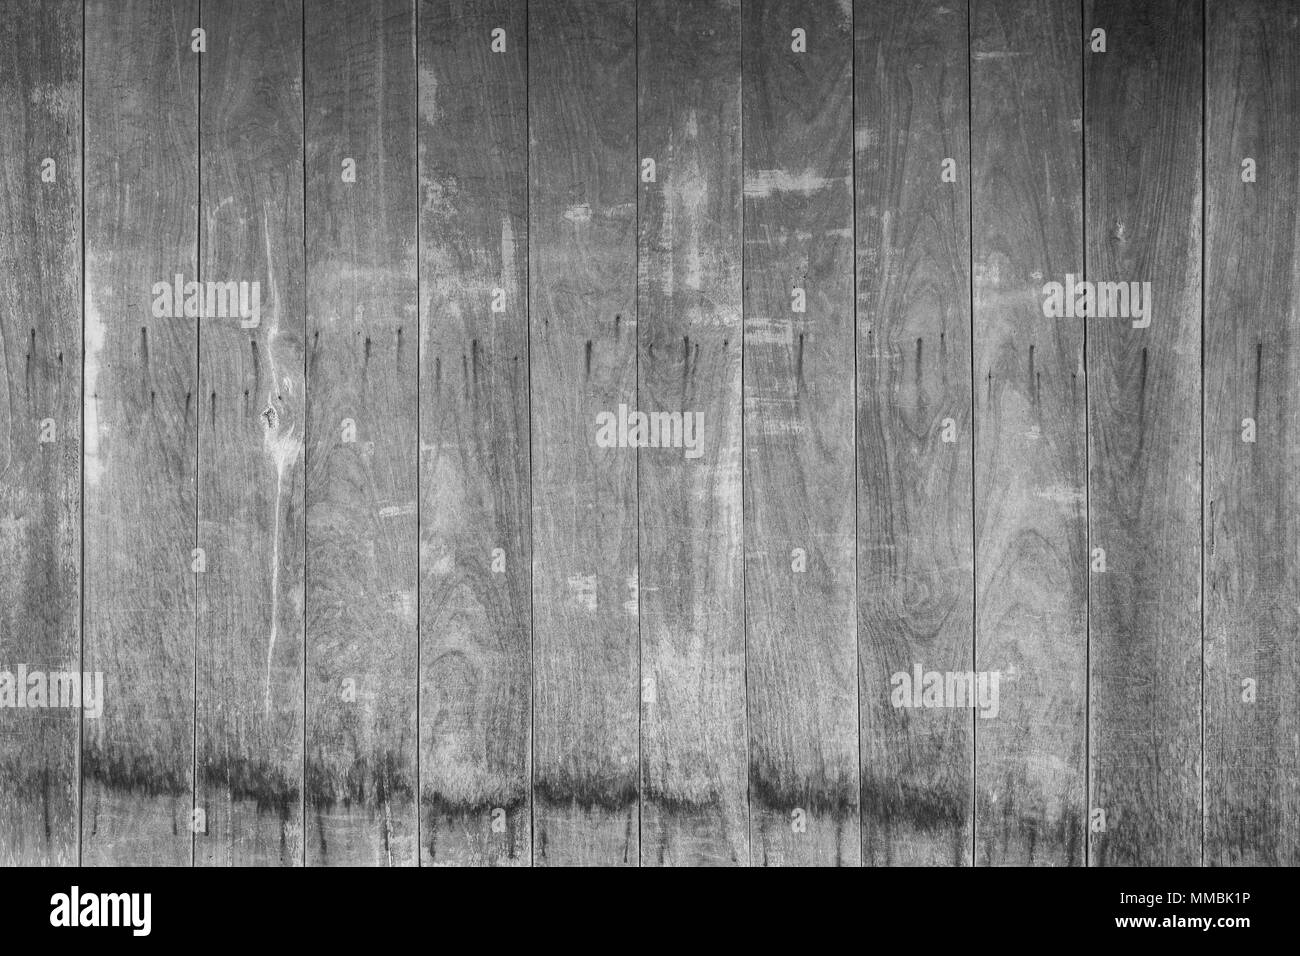 Full frame background of an old and faded wooden board wall in black and white Stock Photo